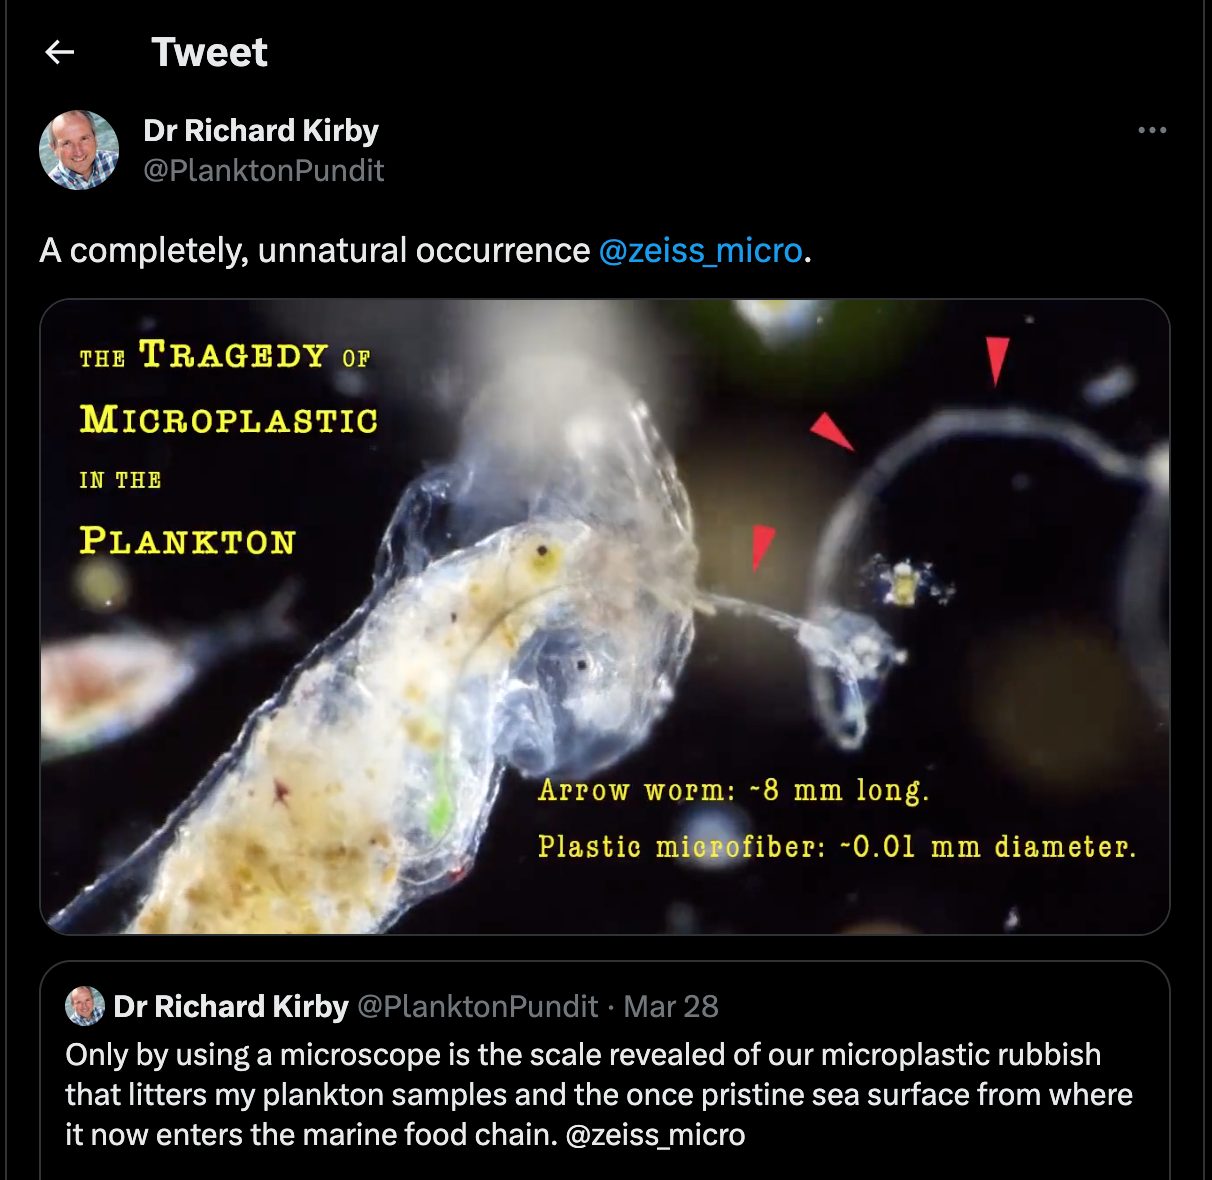 Synthetic microfibers are death traps for plankton.